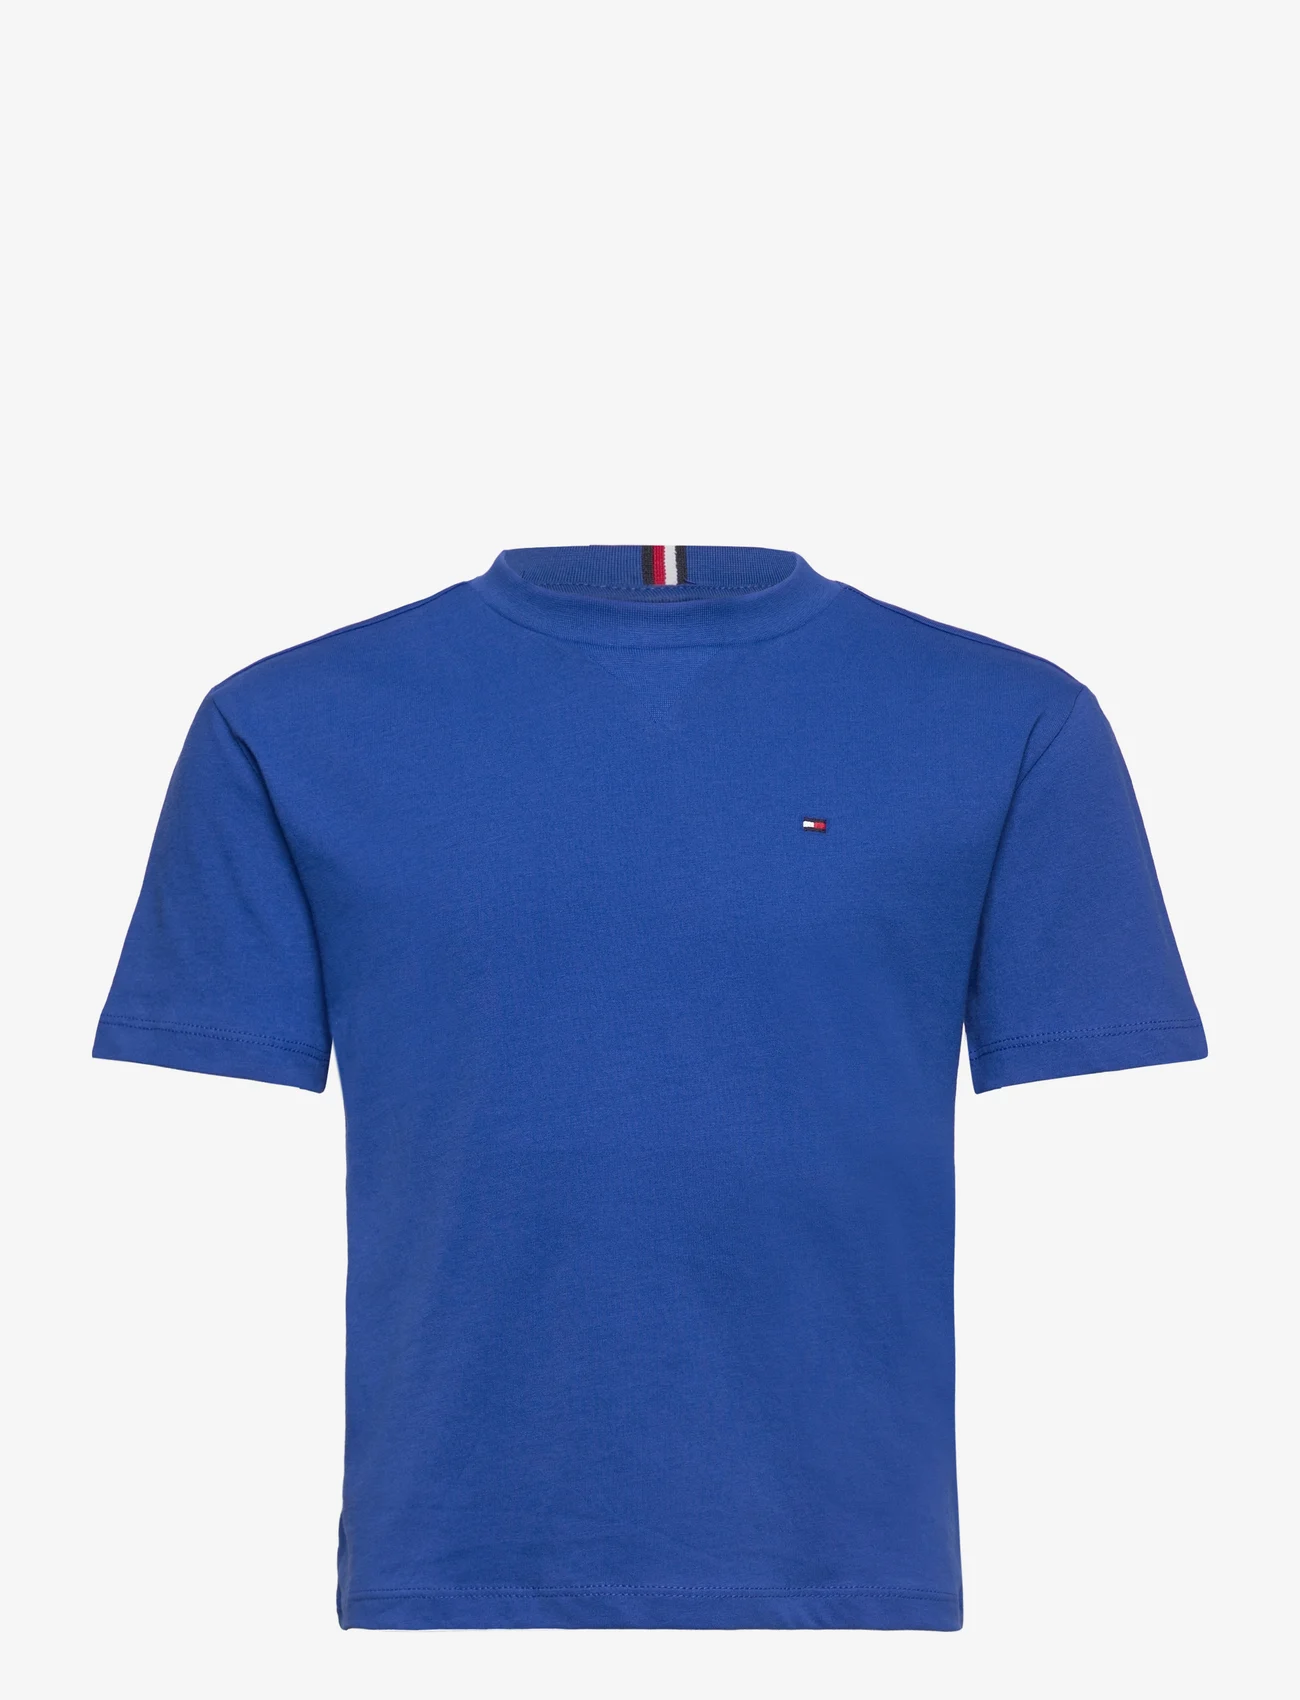 Tommy Hilfiger - ESSENTIAL TEE SS - short-sleeved t-shirts - ultra blue - 0